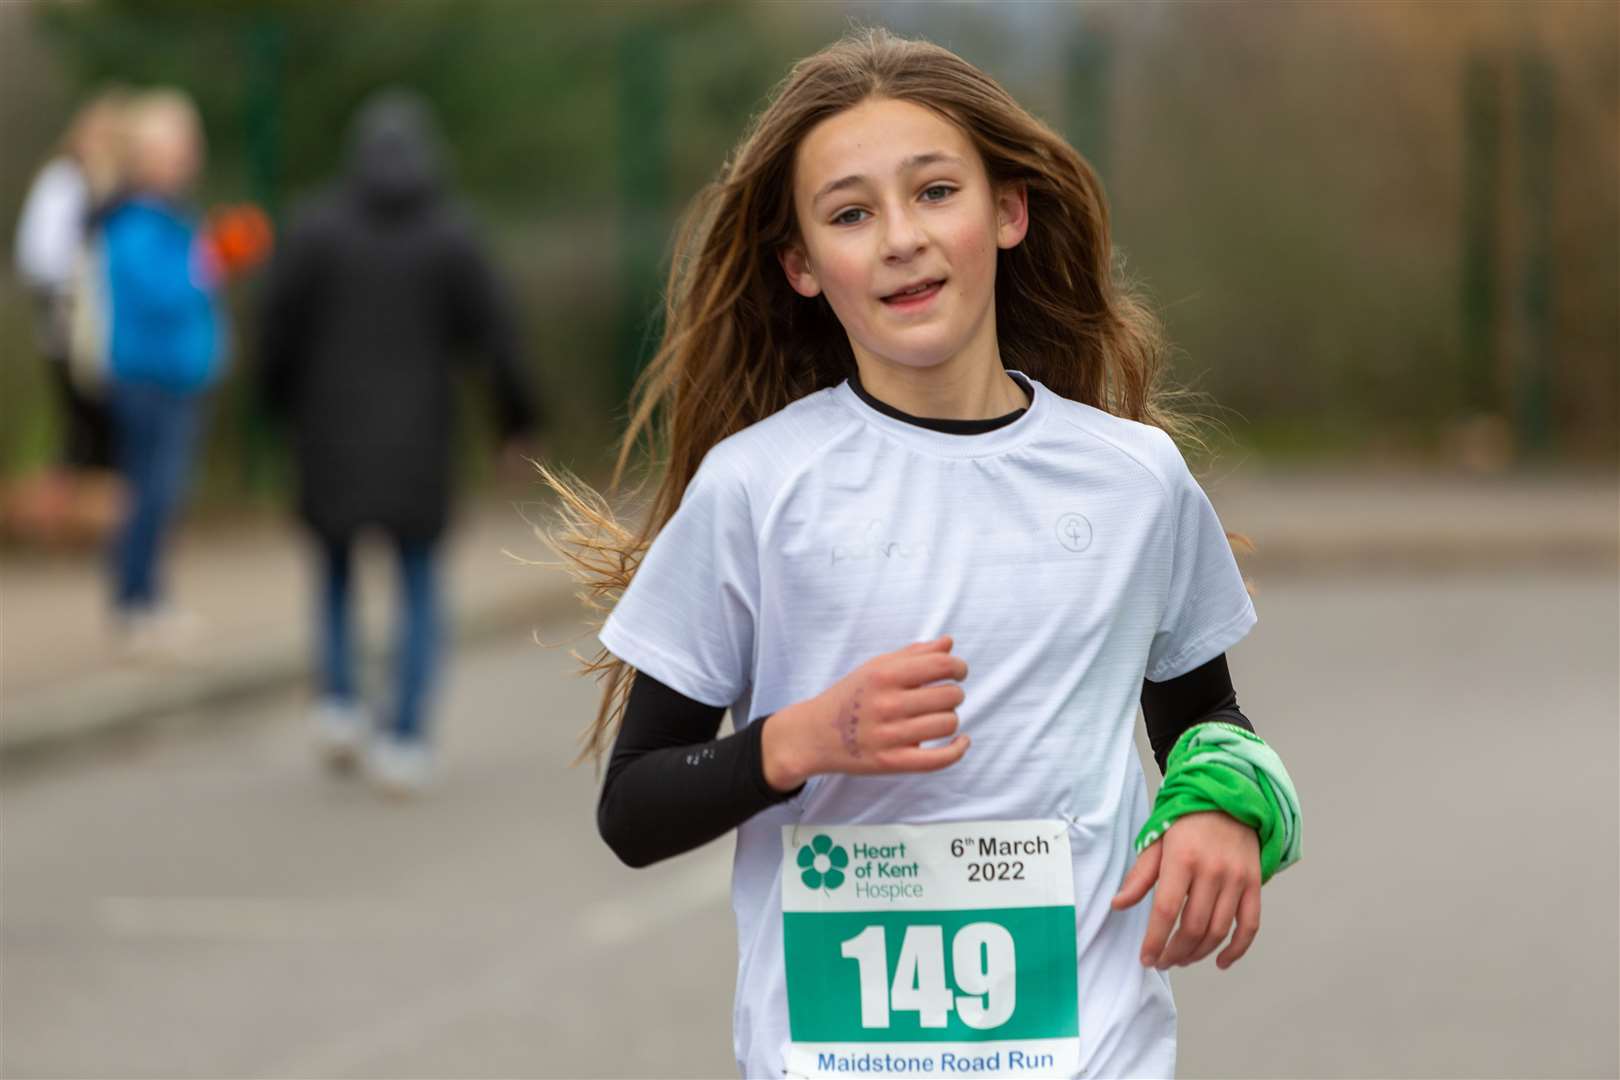 One of the younger runners